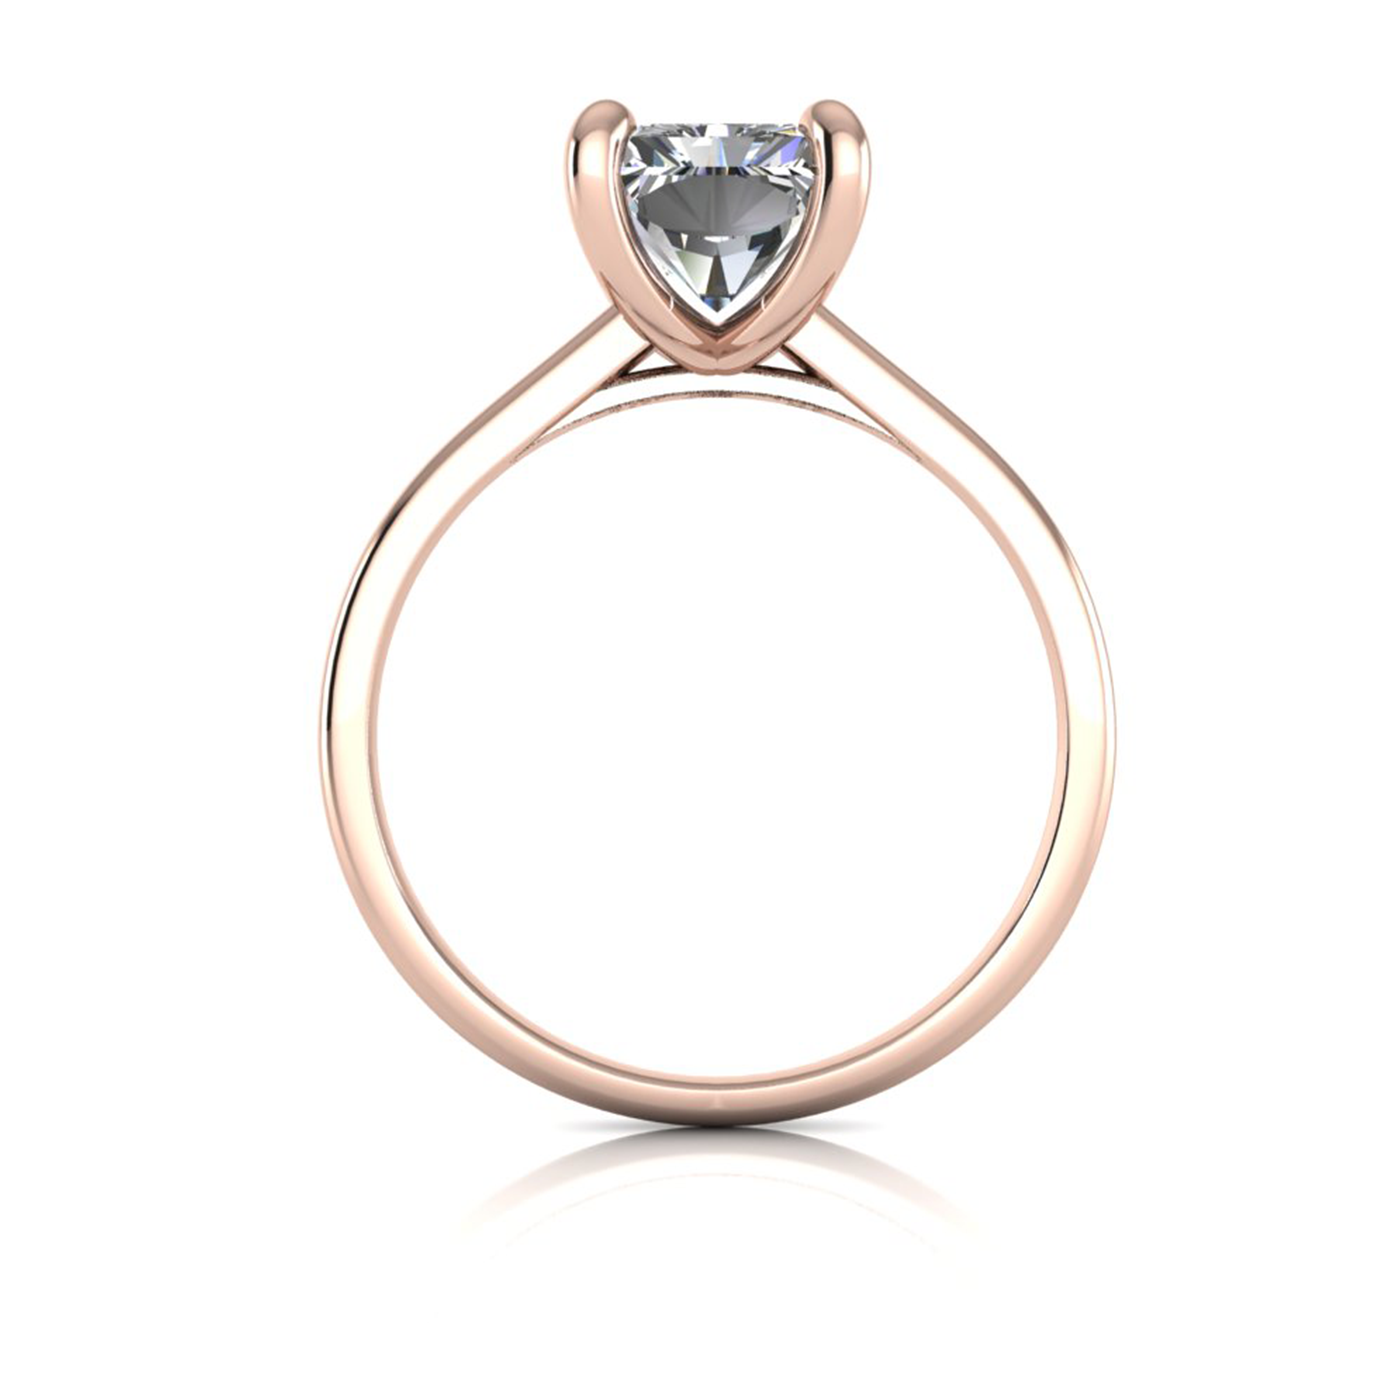 18k rose gold  2,50 ct 4 prongs solitaire radiant cut diamond engagement ring with whisper thin band